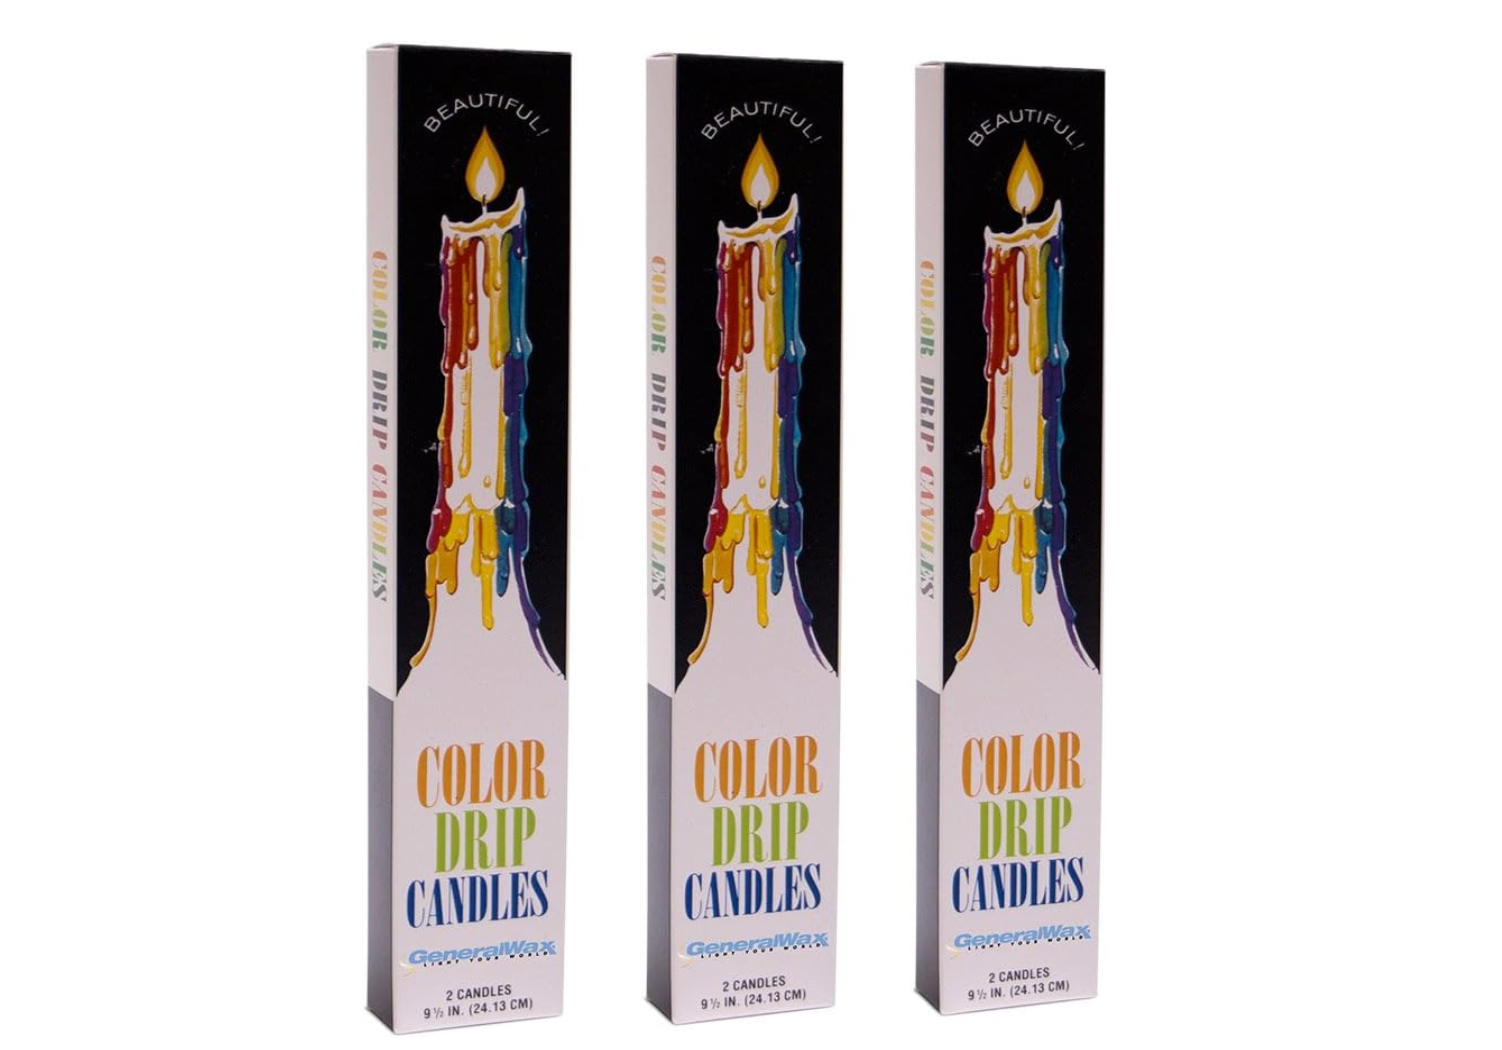 Color drip candles are a classic candle style.